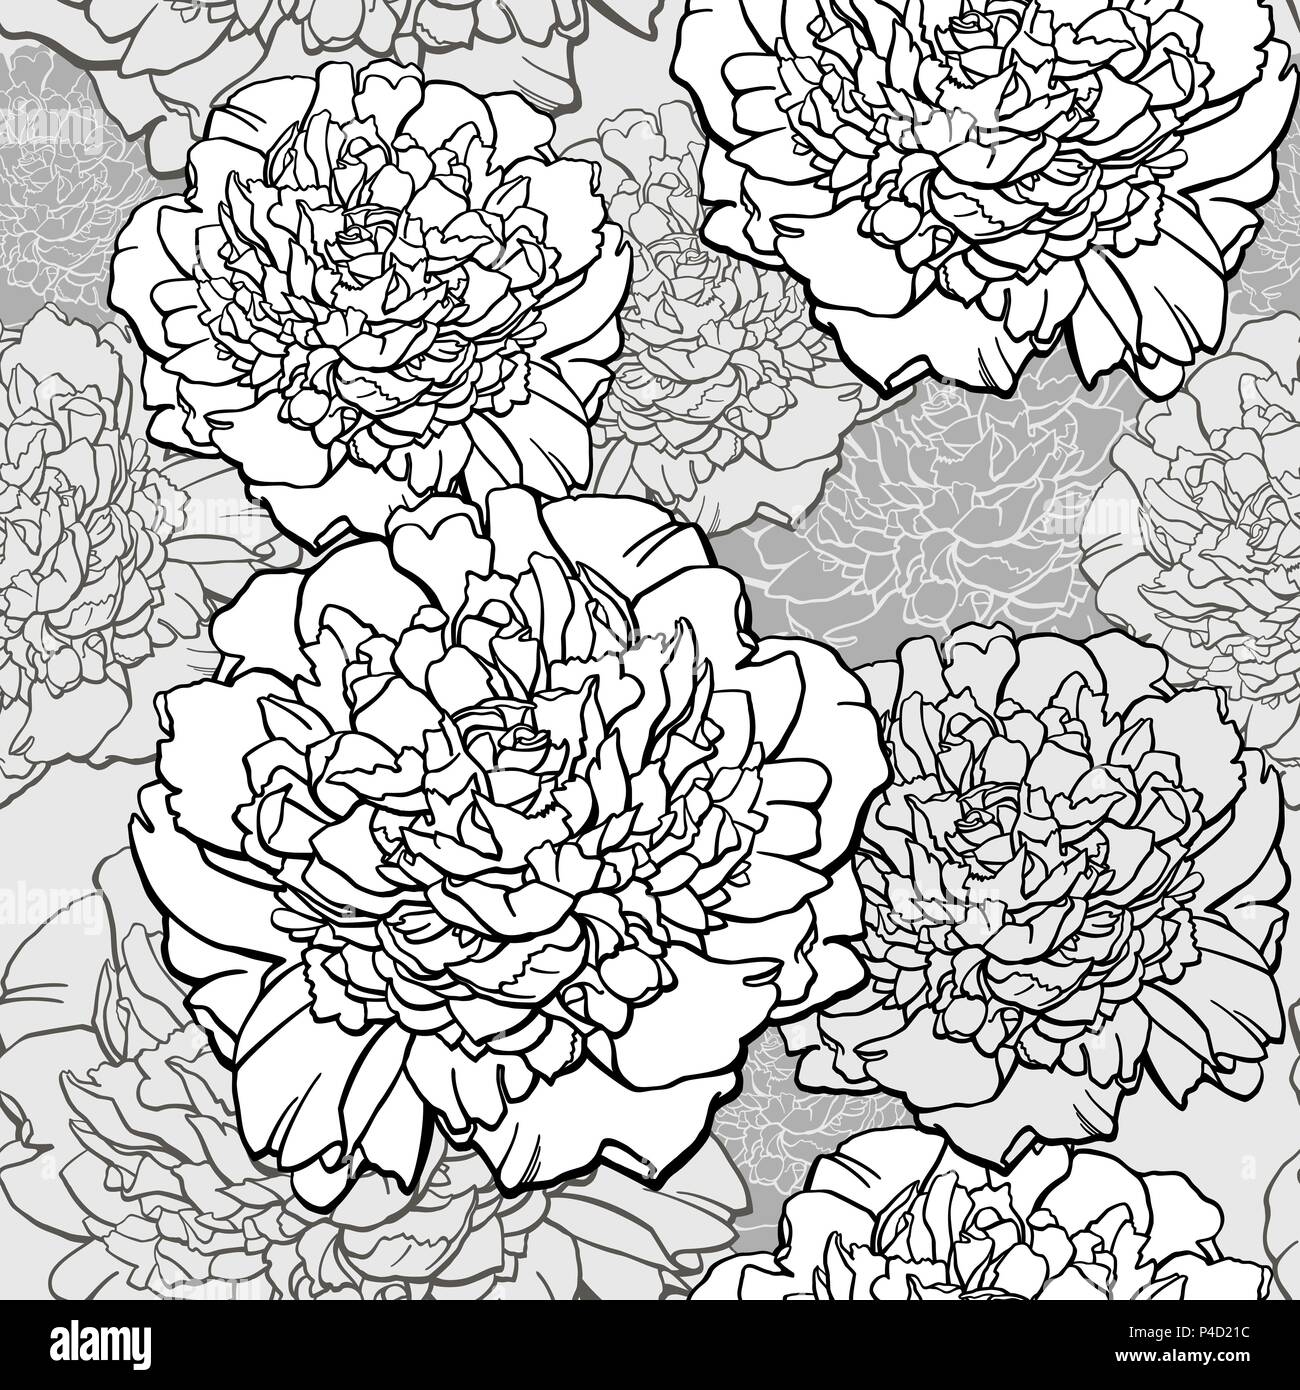 Peonies. T-shirt design. Sketched flower print in monochrome colors - seamless background. Hand-drawn vector illustration. Stock Vector